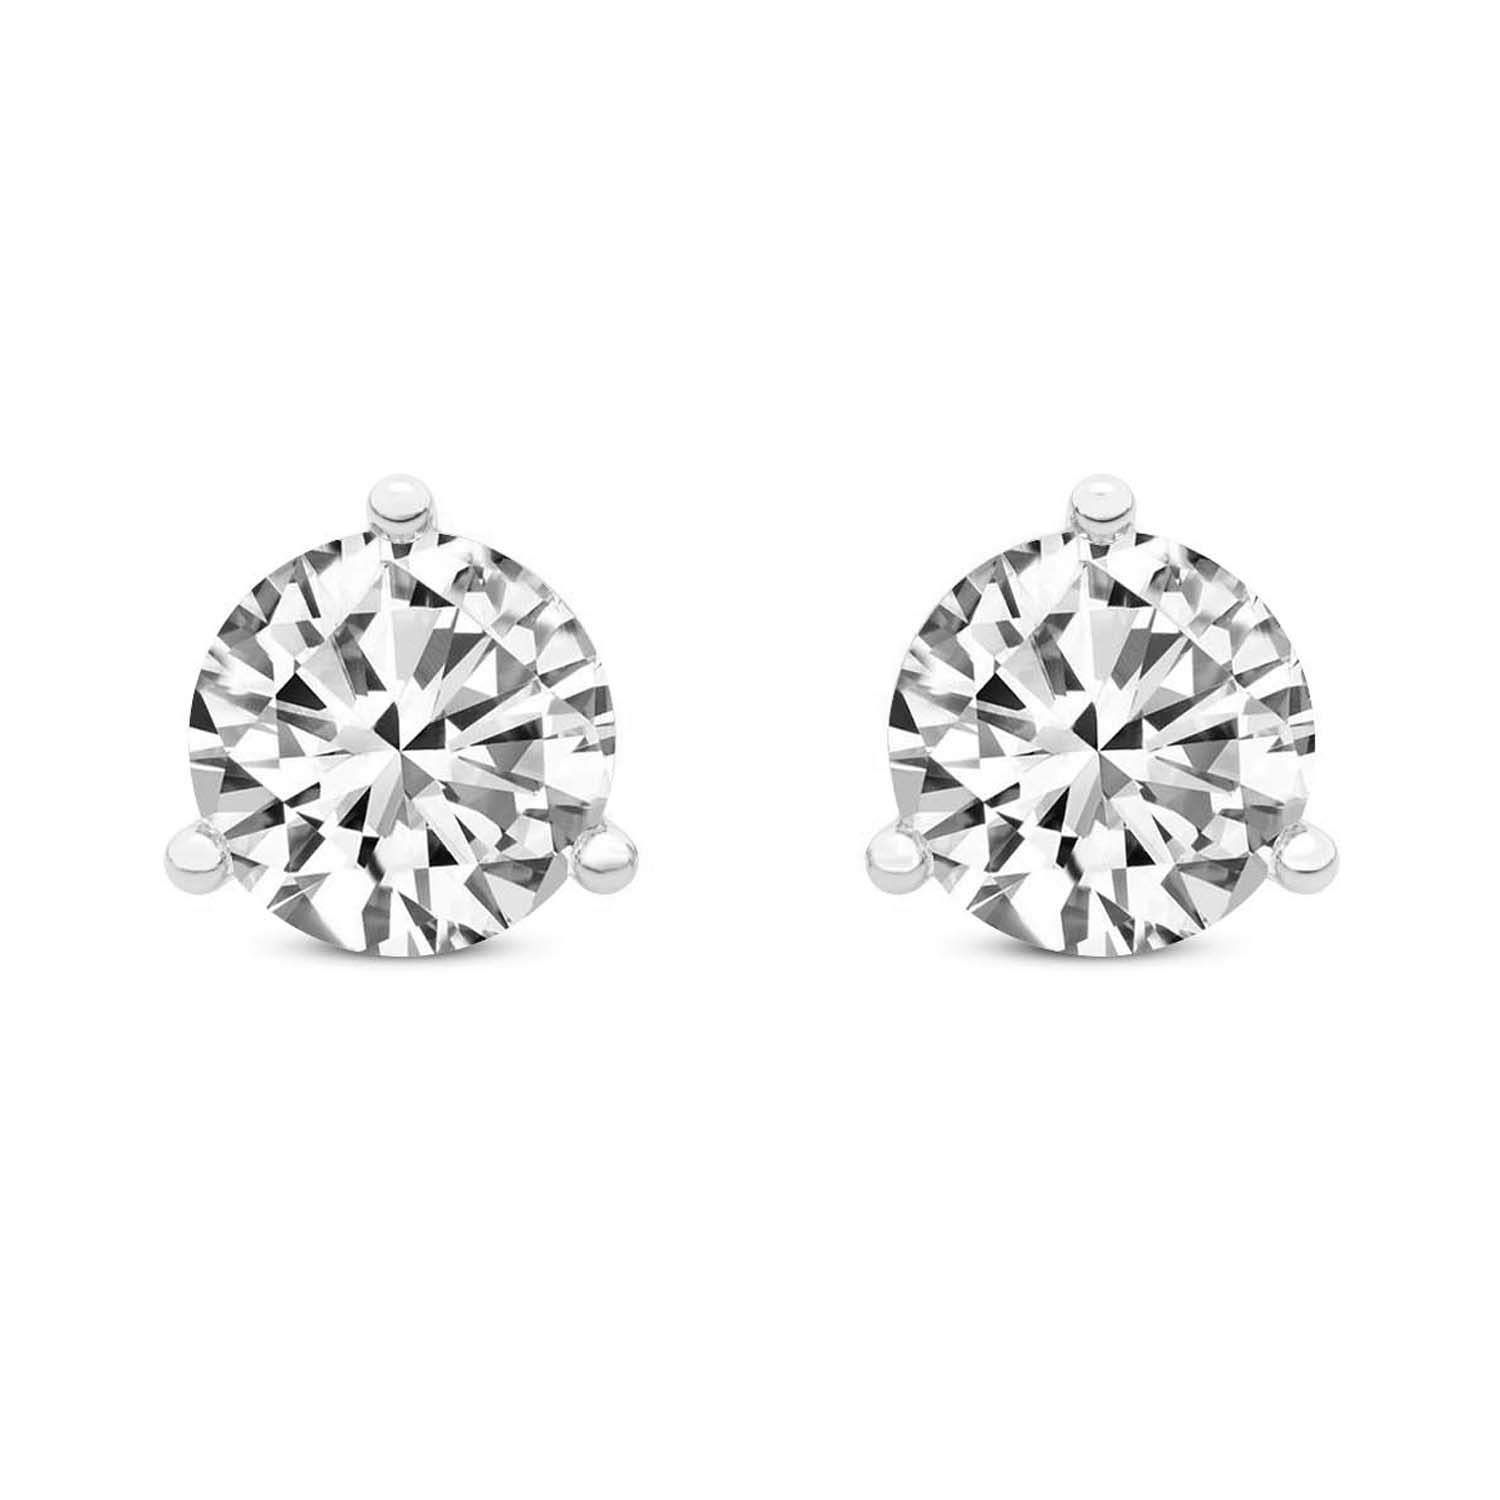 3 Prong Martini Round Lab Diamond Stud Earrings white gold earring, small front view